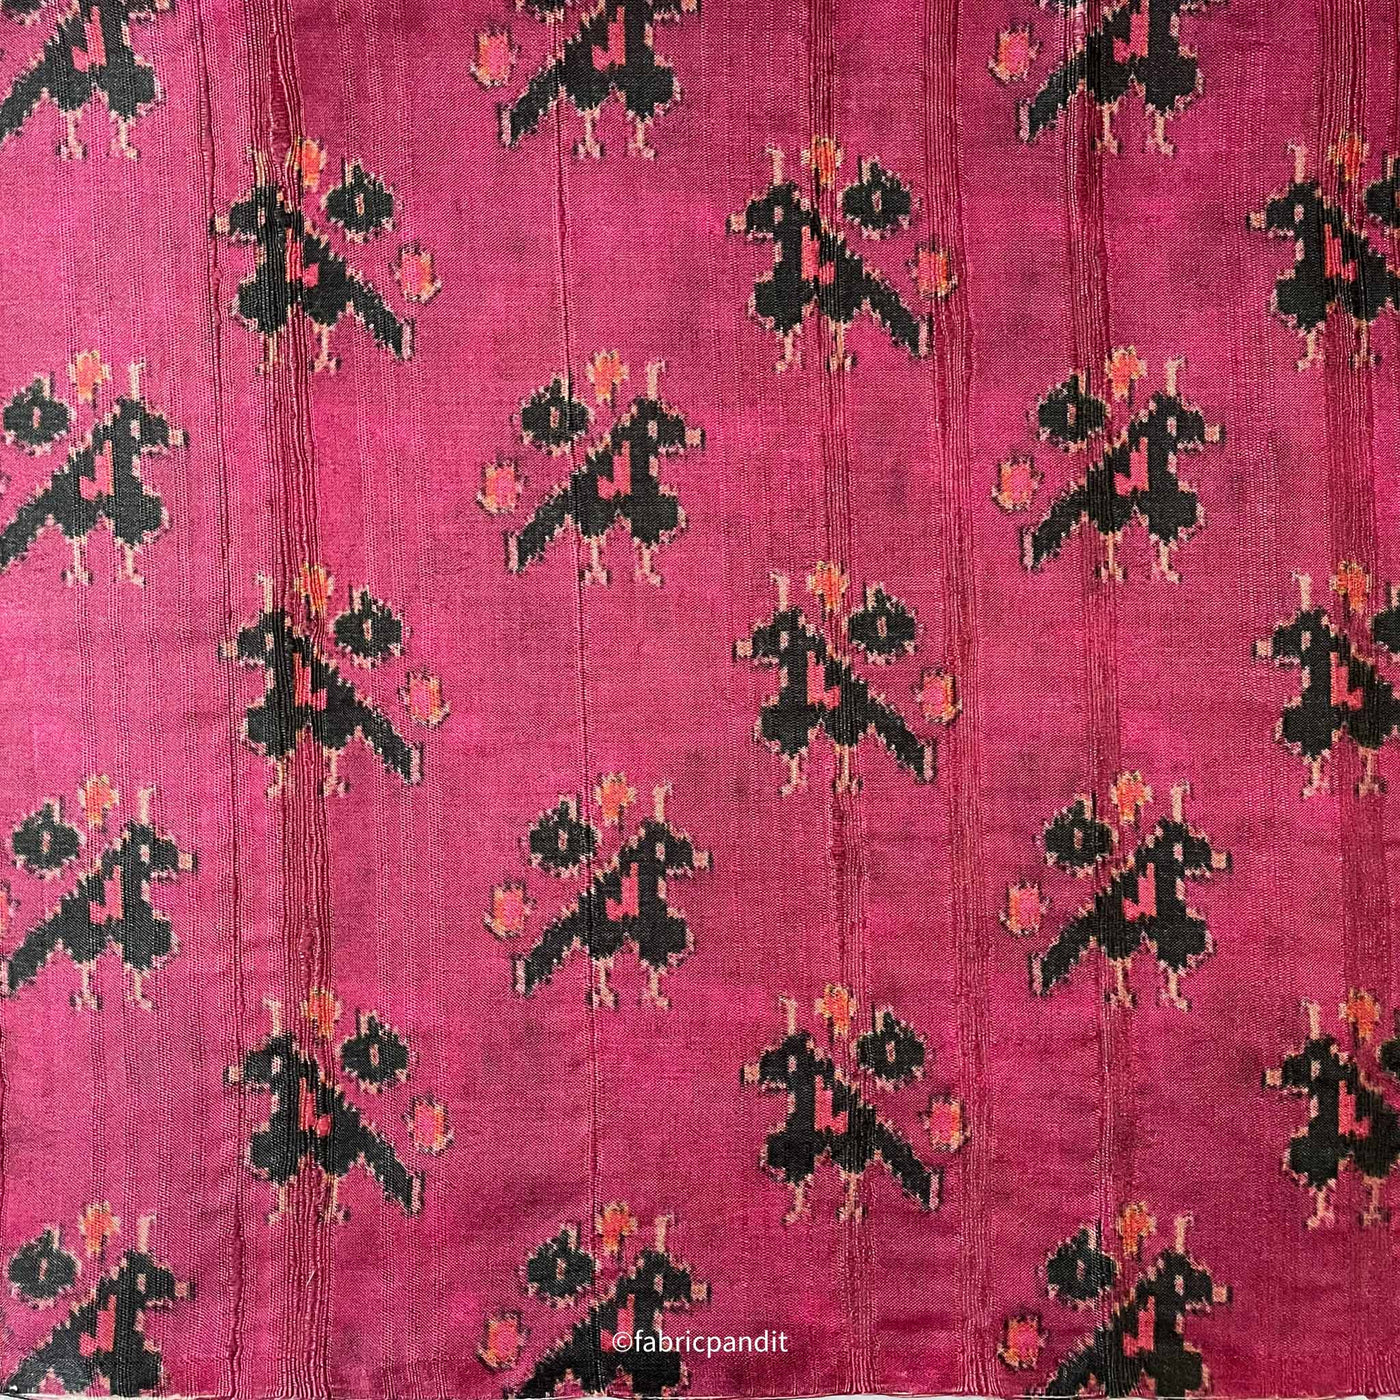 Fabric Pandit Cut Piece (CUT PIECE) Classic Magenta Abstract Parrot Digital Printed Tussar Silk Fabric (Width 44 Inches)